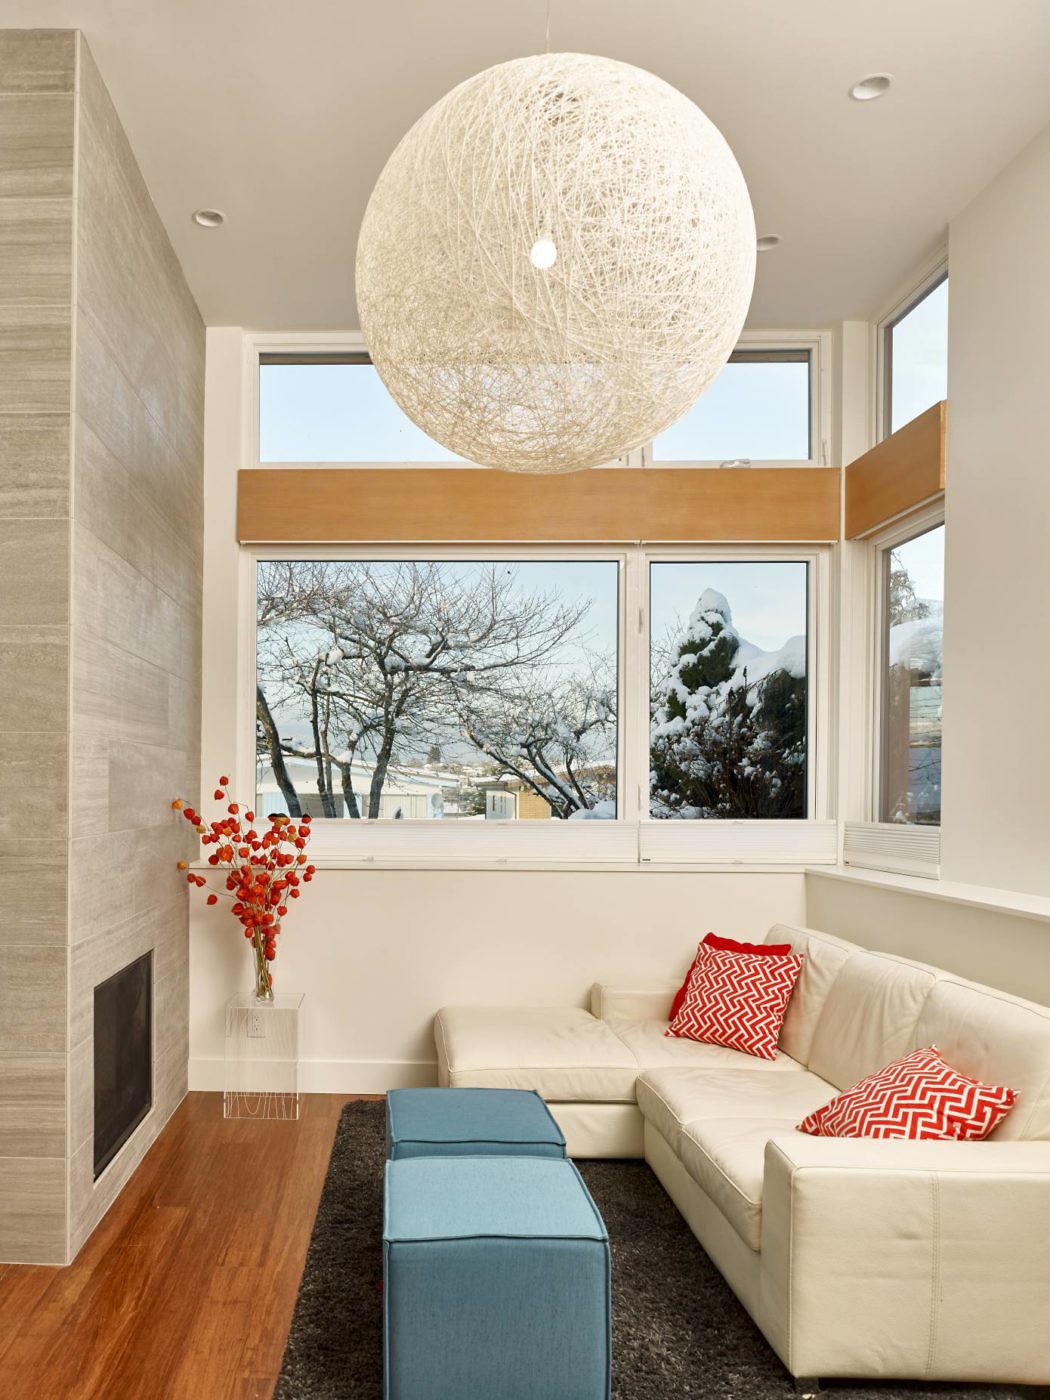 Modern living room with large pendant light, sectional sofa, and winter view through windows